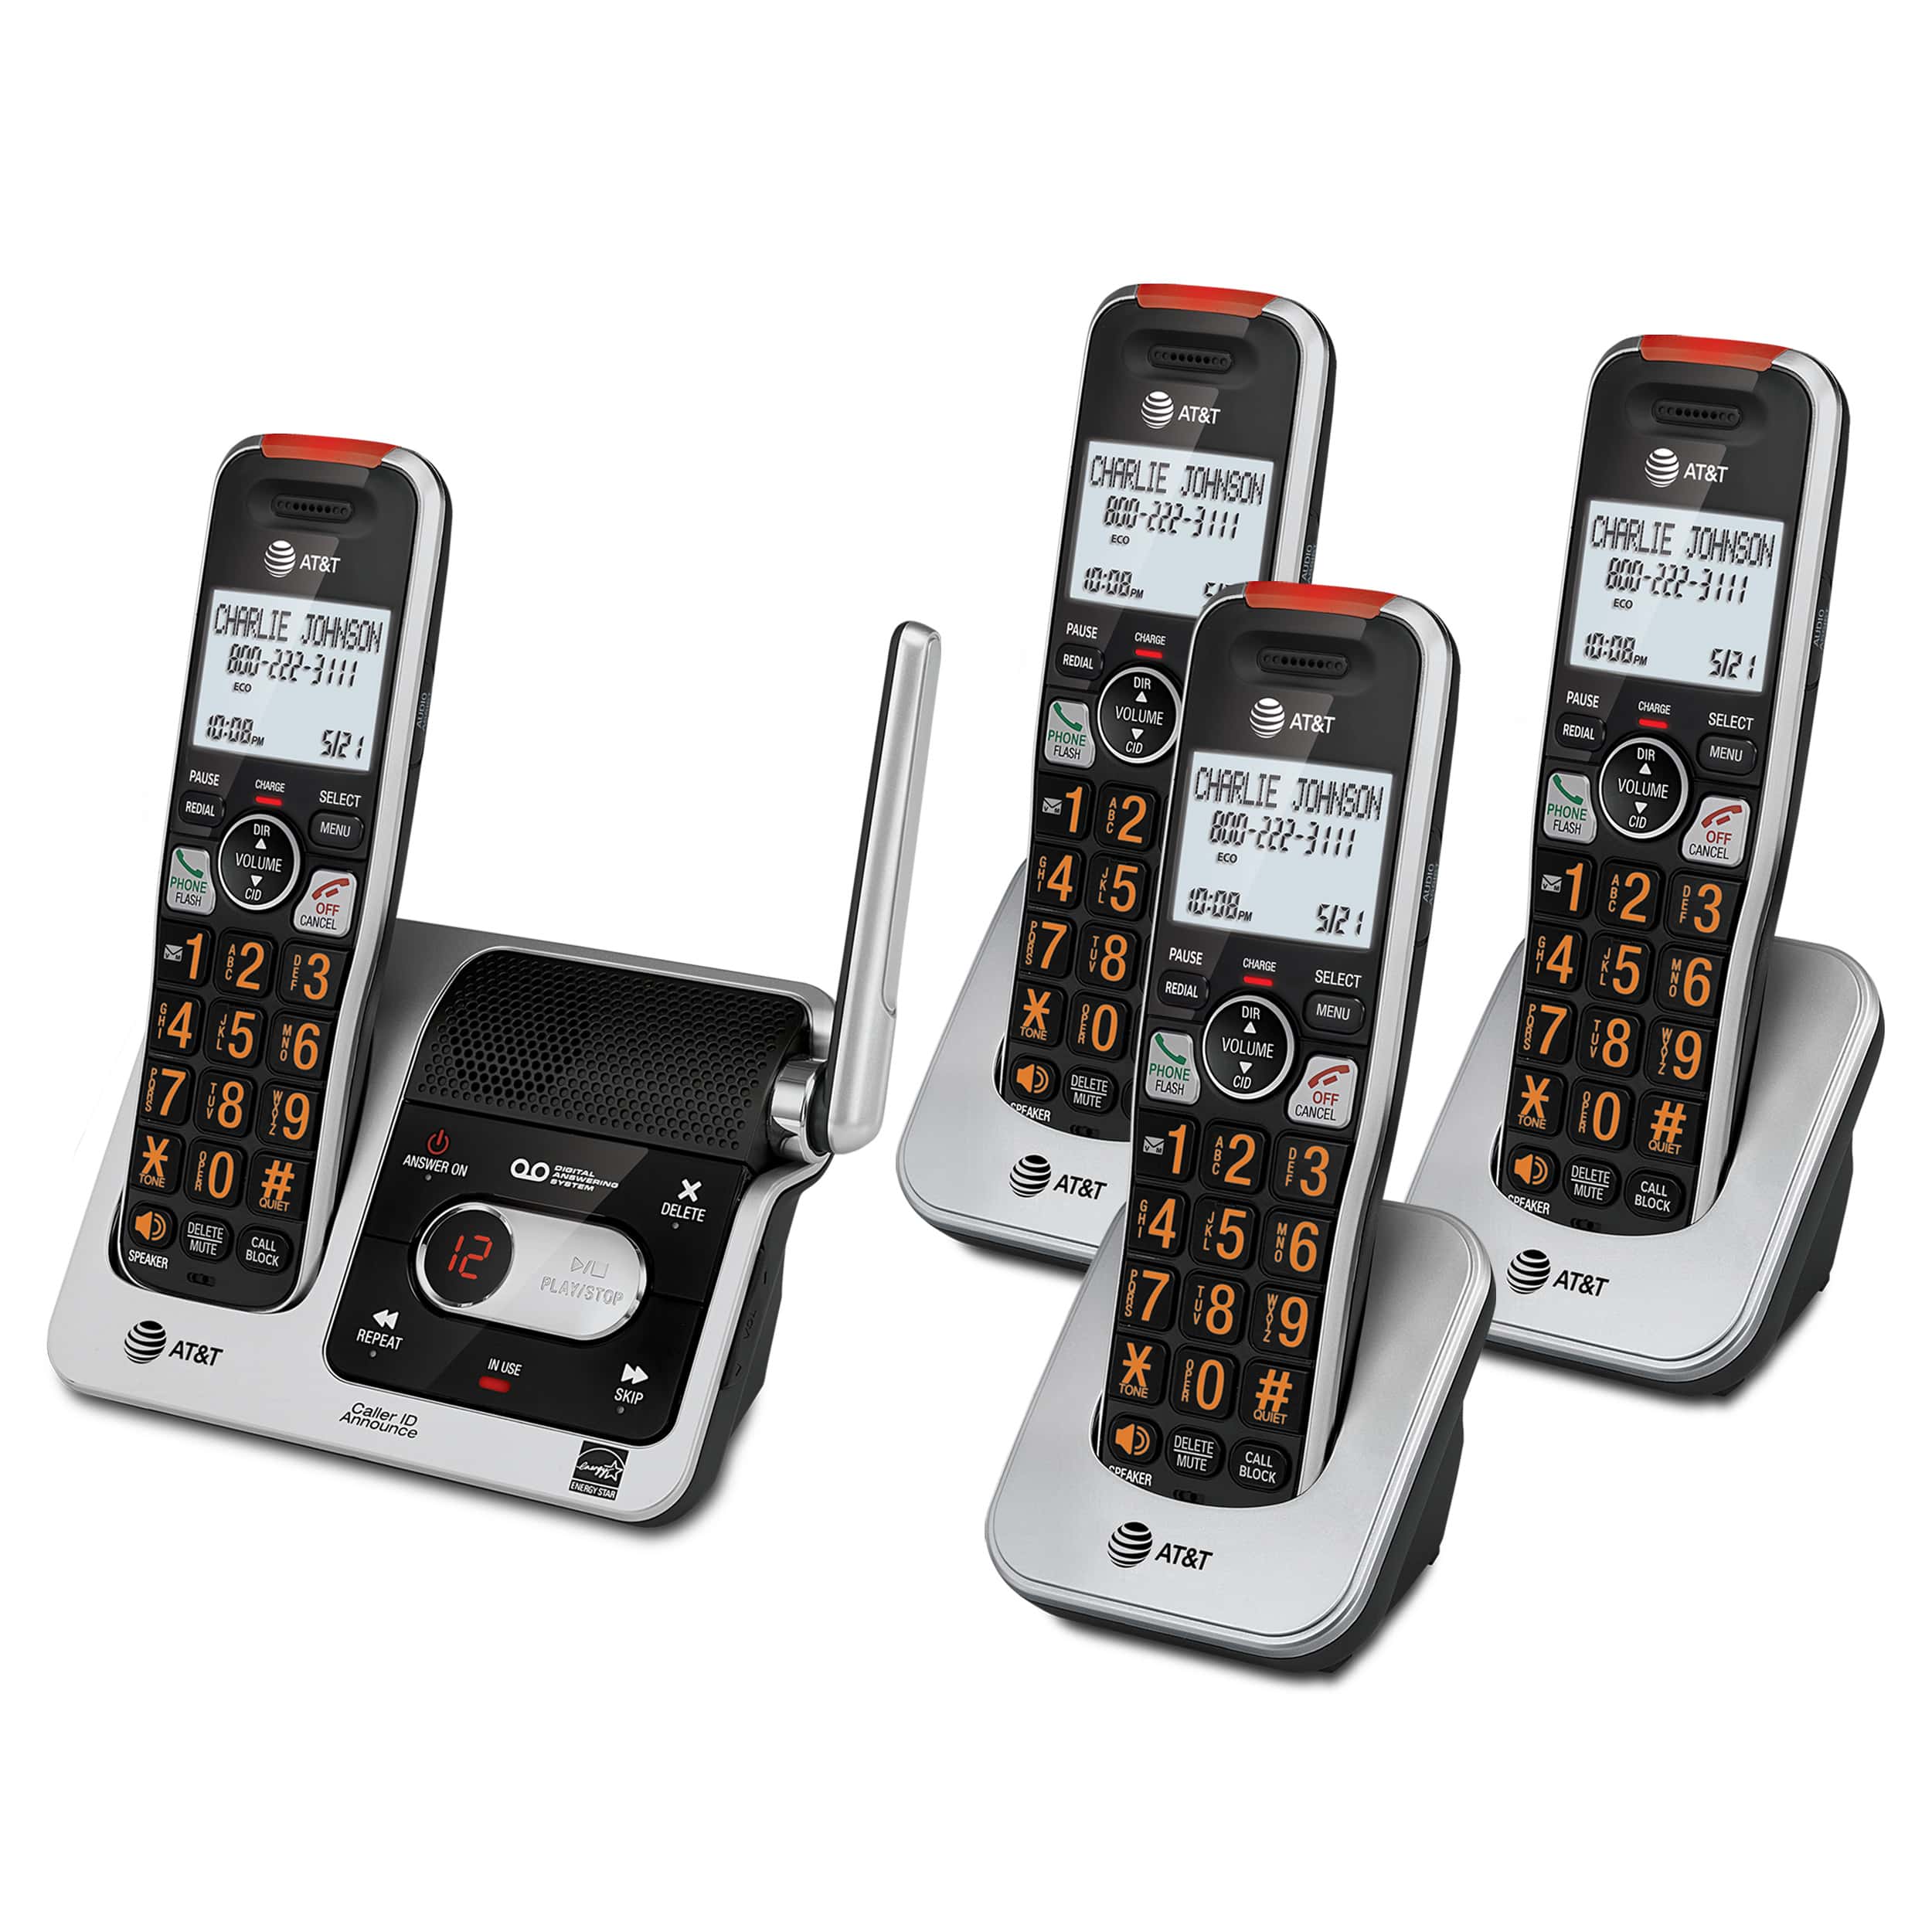 4-Handset Cordless Phone with Unsurpassed Range, Smart Call Blocker and Answering System - view 3